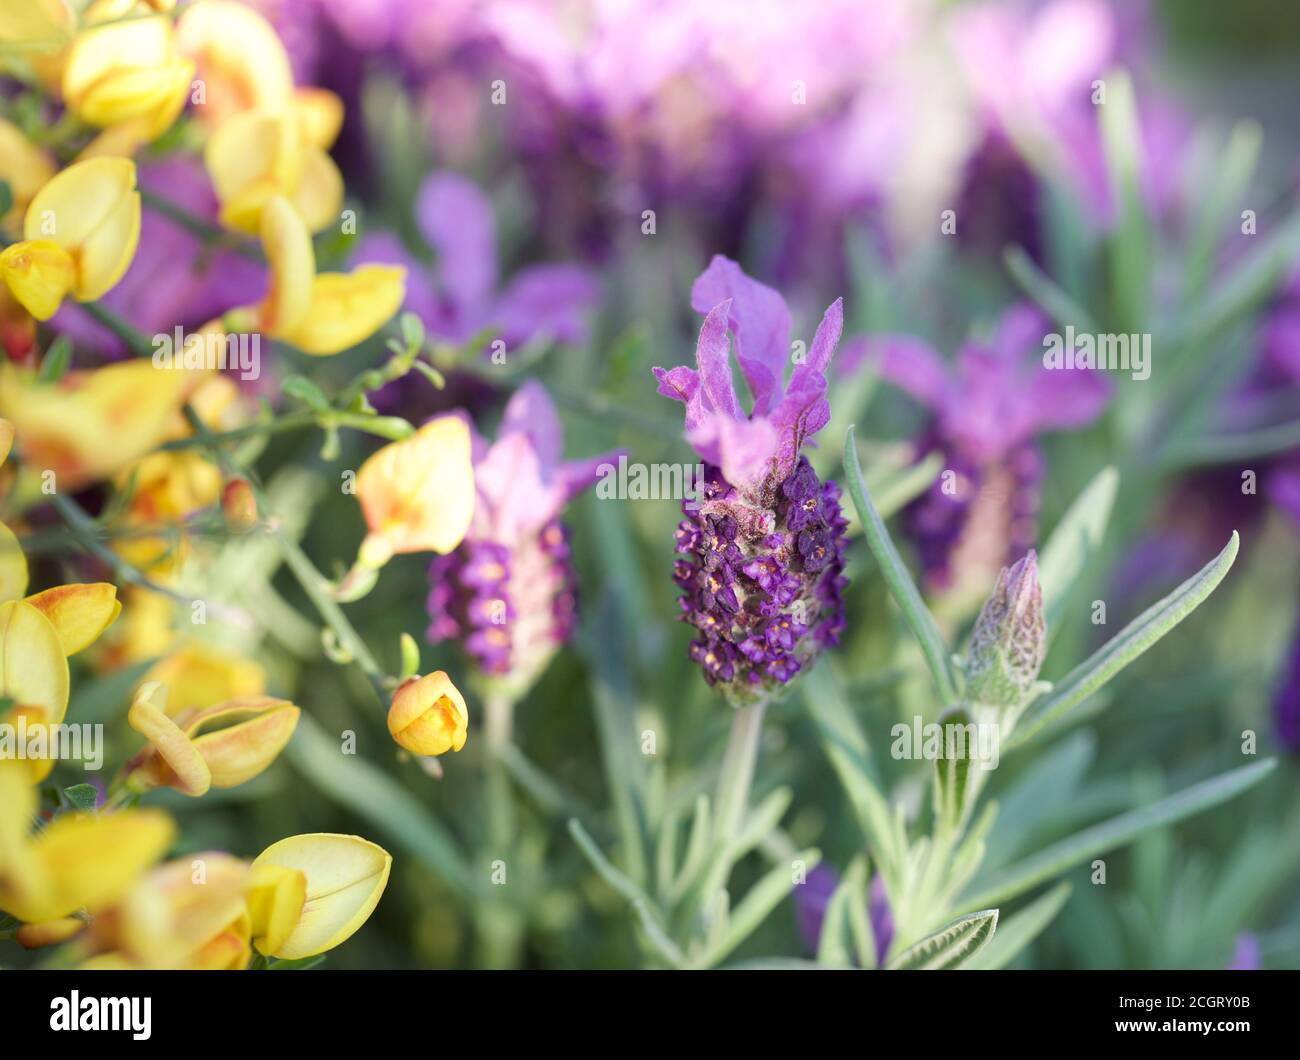 French Lavender Stems in full bloom next to a bunch of Yellow Cytisus scoparius Spring Flowers Stock Photo